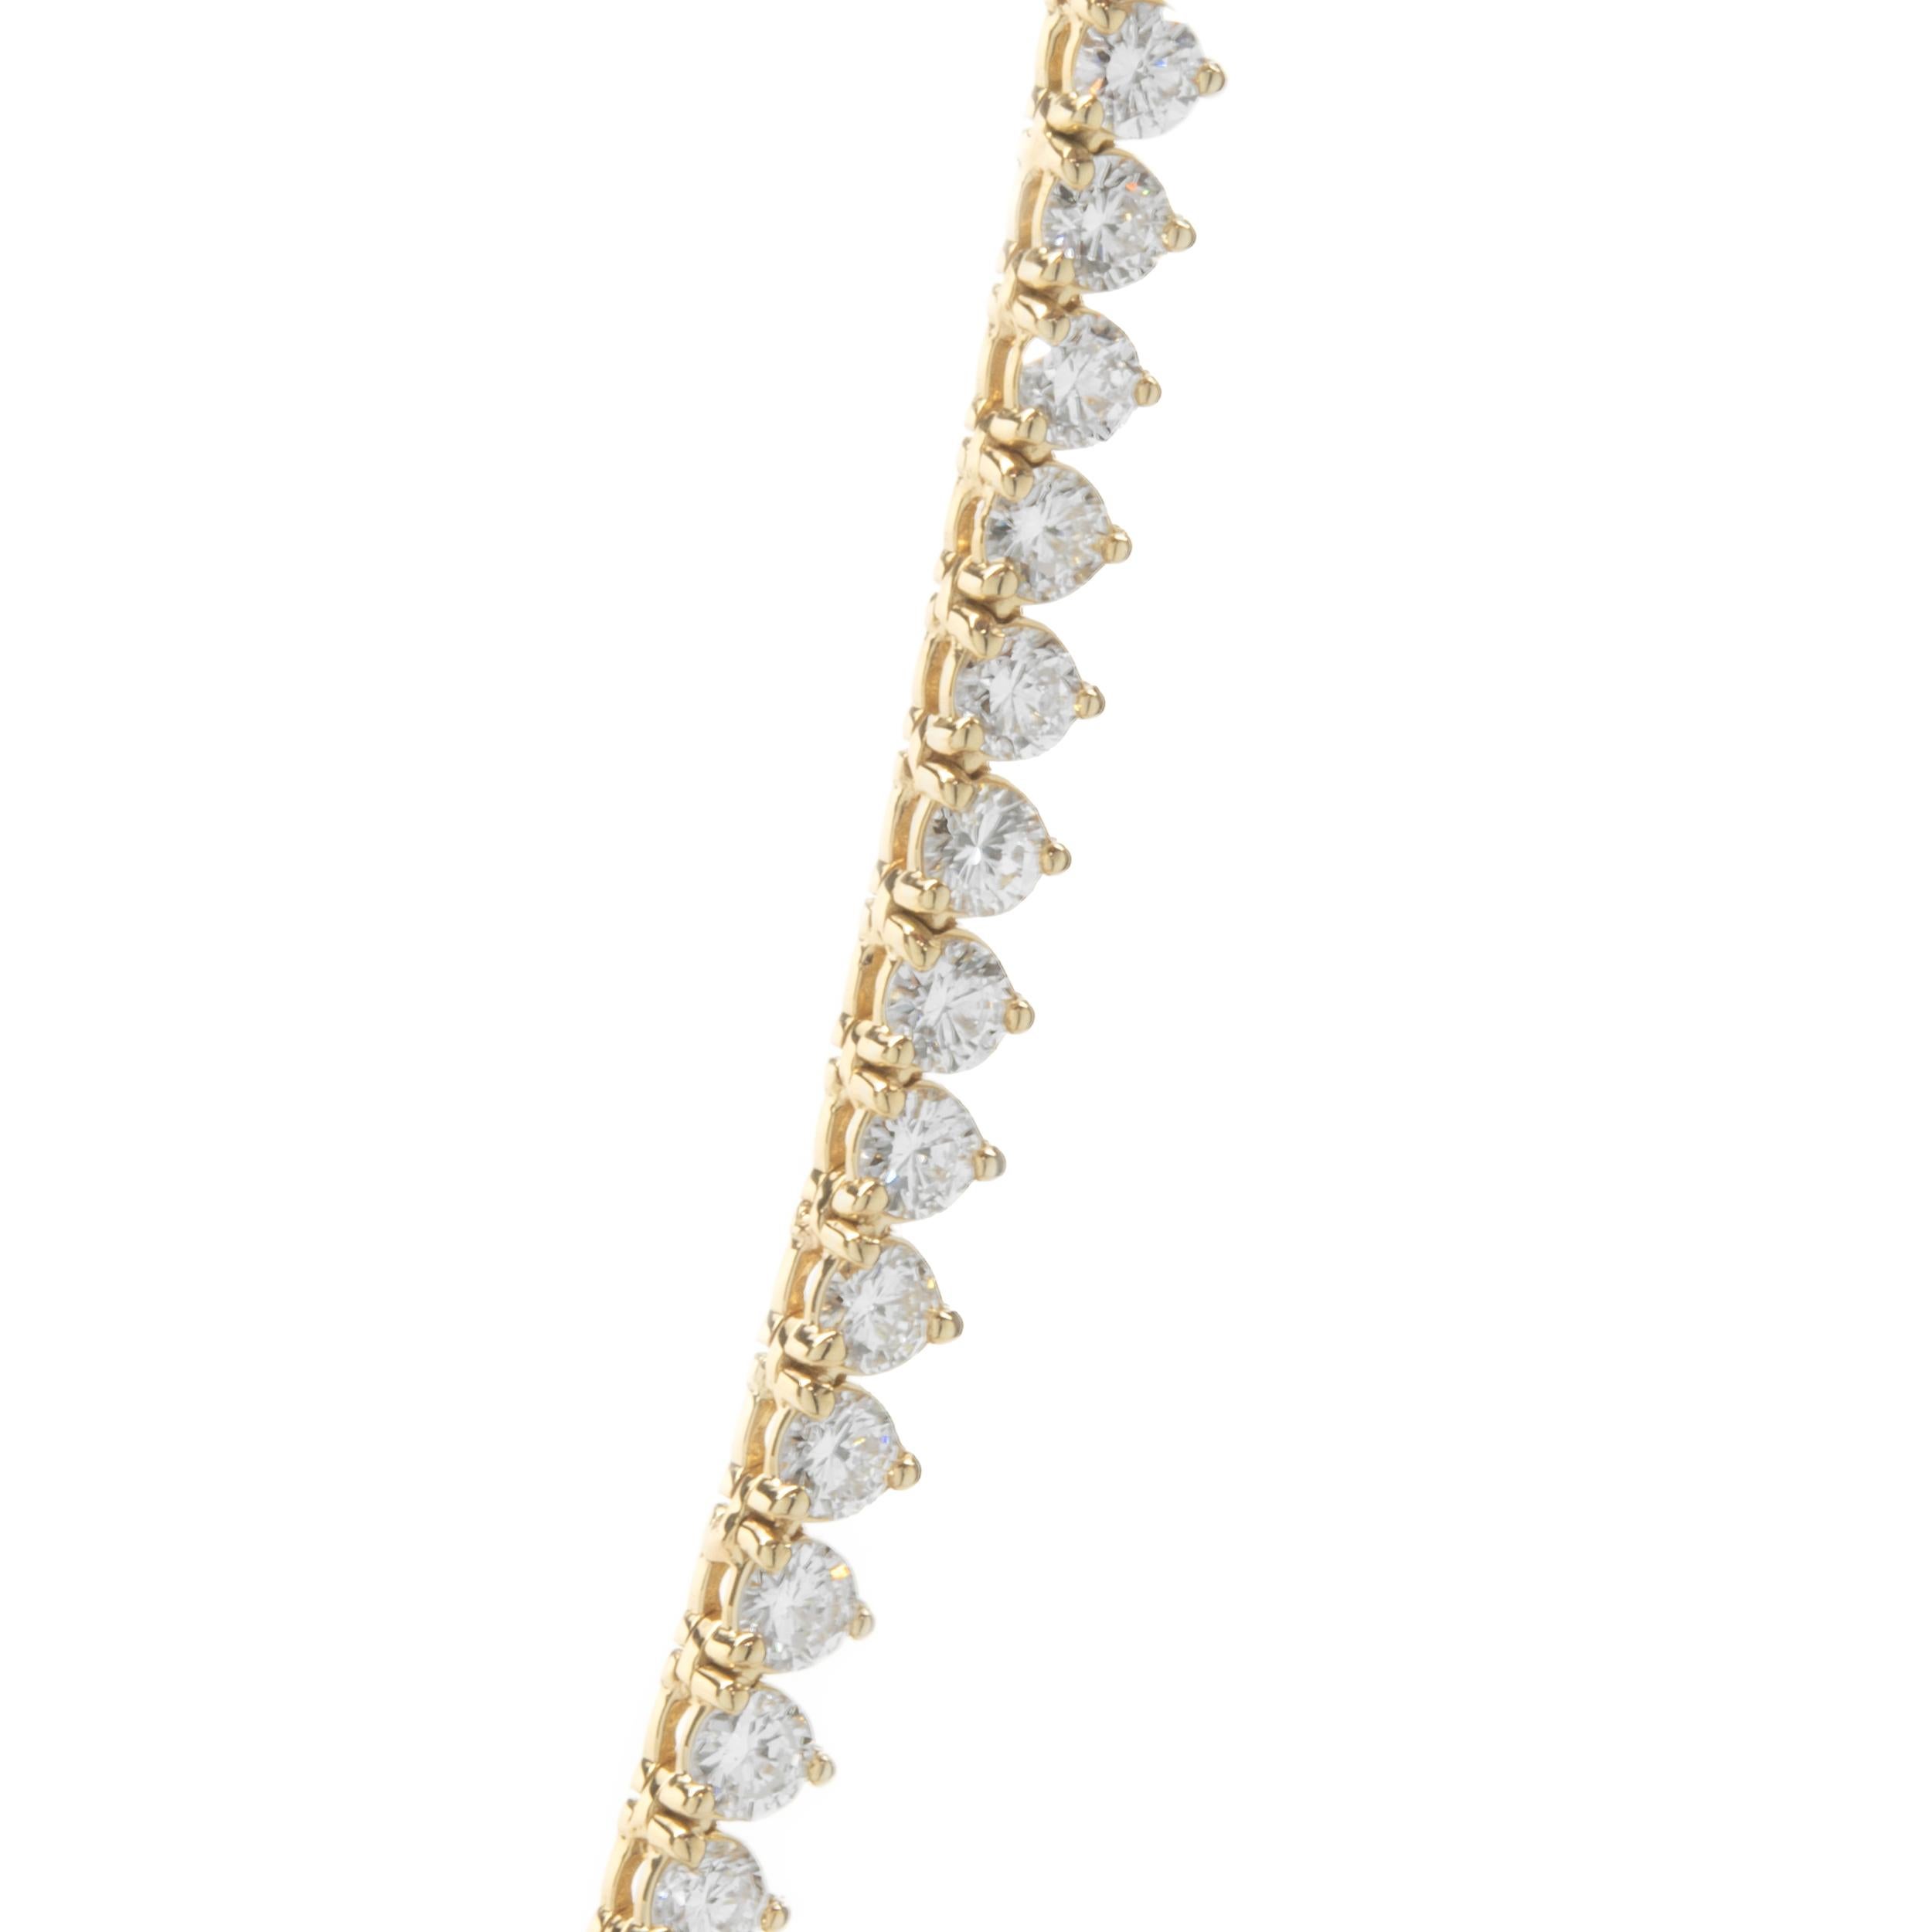 Designer: custom design
Material: 18K yellow gold
Diamond: 155 round brilliant cut = 8.01cttw
Color: G
Clarity: VS2
Dimensions: necklace measures 17-inches in length 
Weight: 16.70 grams